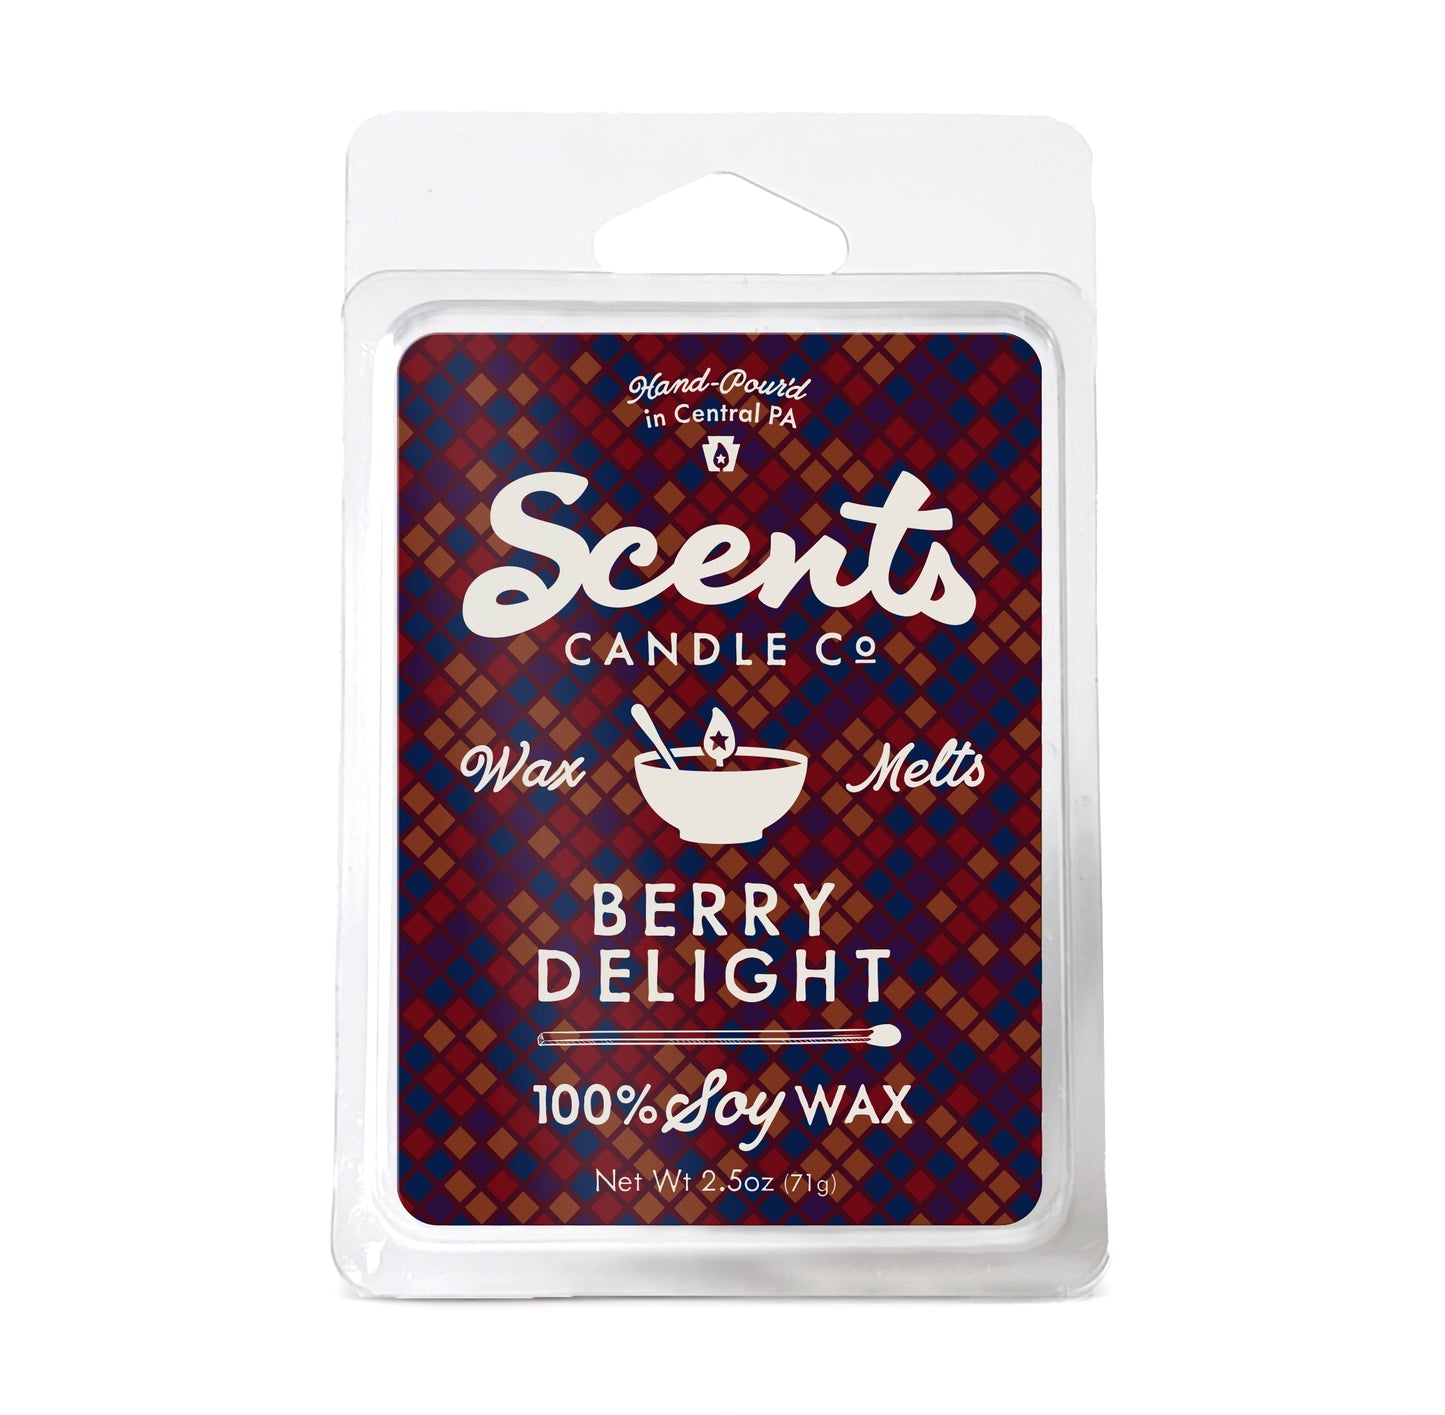 Scents Candle Co. Berry Delight Wax Melt